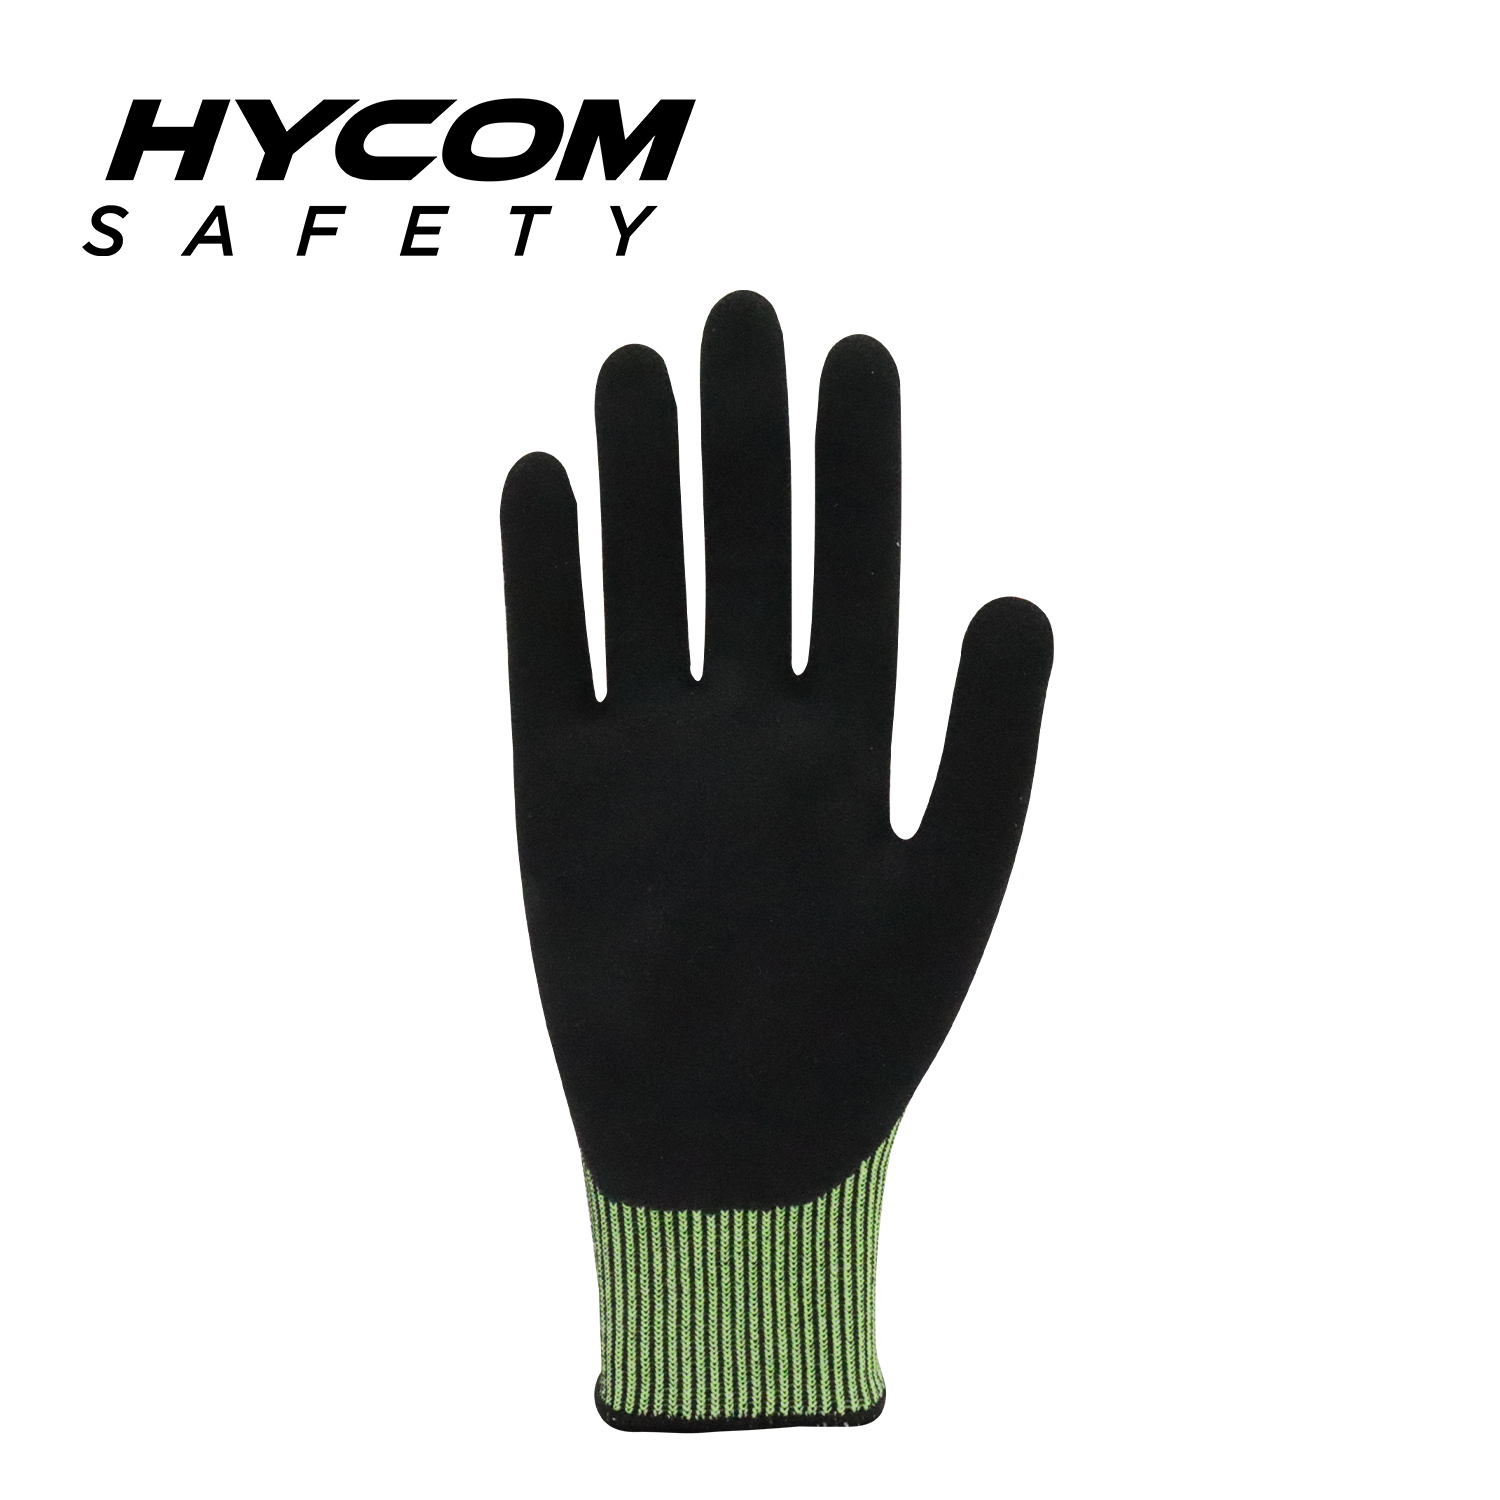 HYCOM 13G ANSI 8 Cut Resistant Glove with Palm Nitrile Coating PPE Gloves